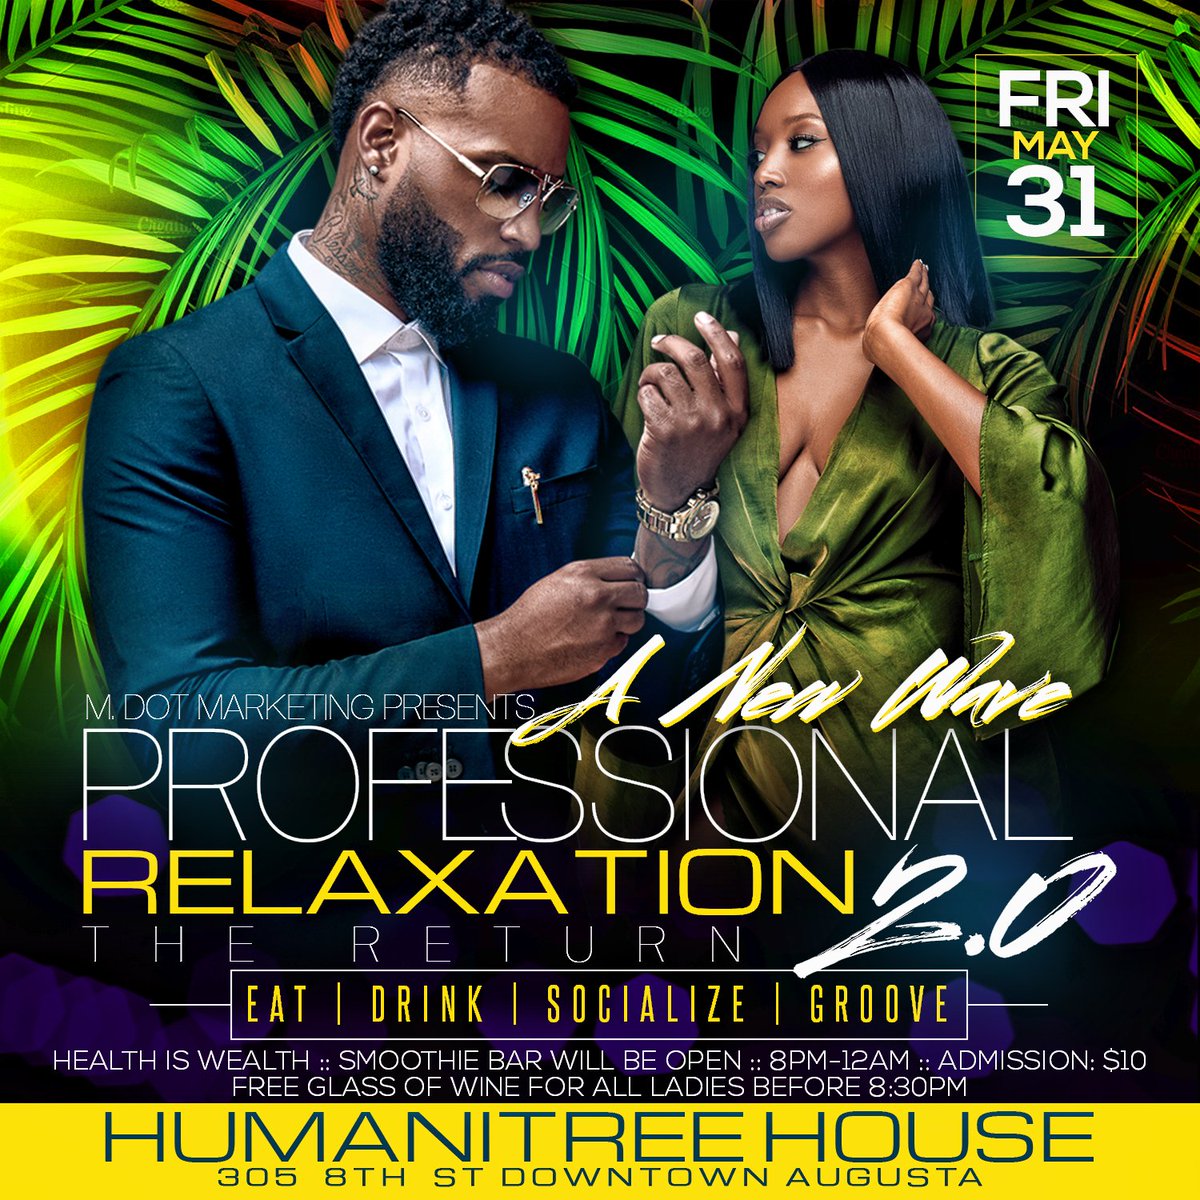 This Fri May 31st #pullup at @HumanitreeHouse for #ProfessionalRelaxation with @MDOT_4daWin @toniblaque @Skrilla4x @DatBoiVille